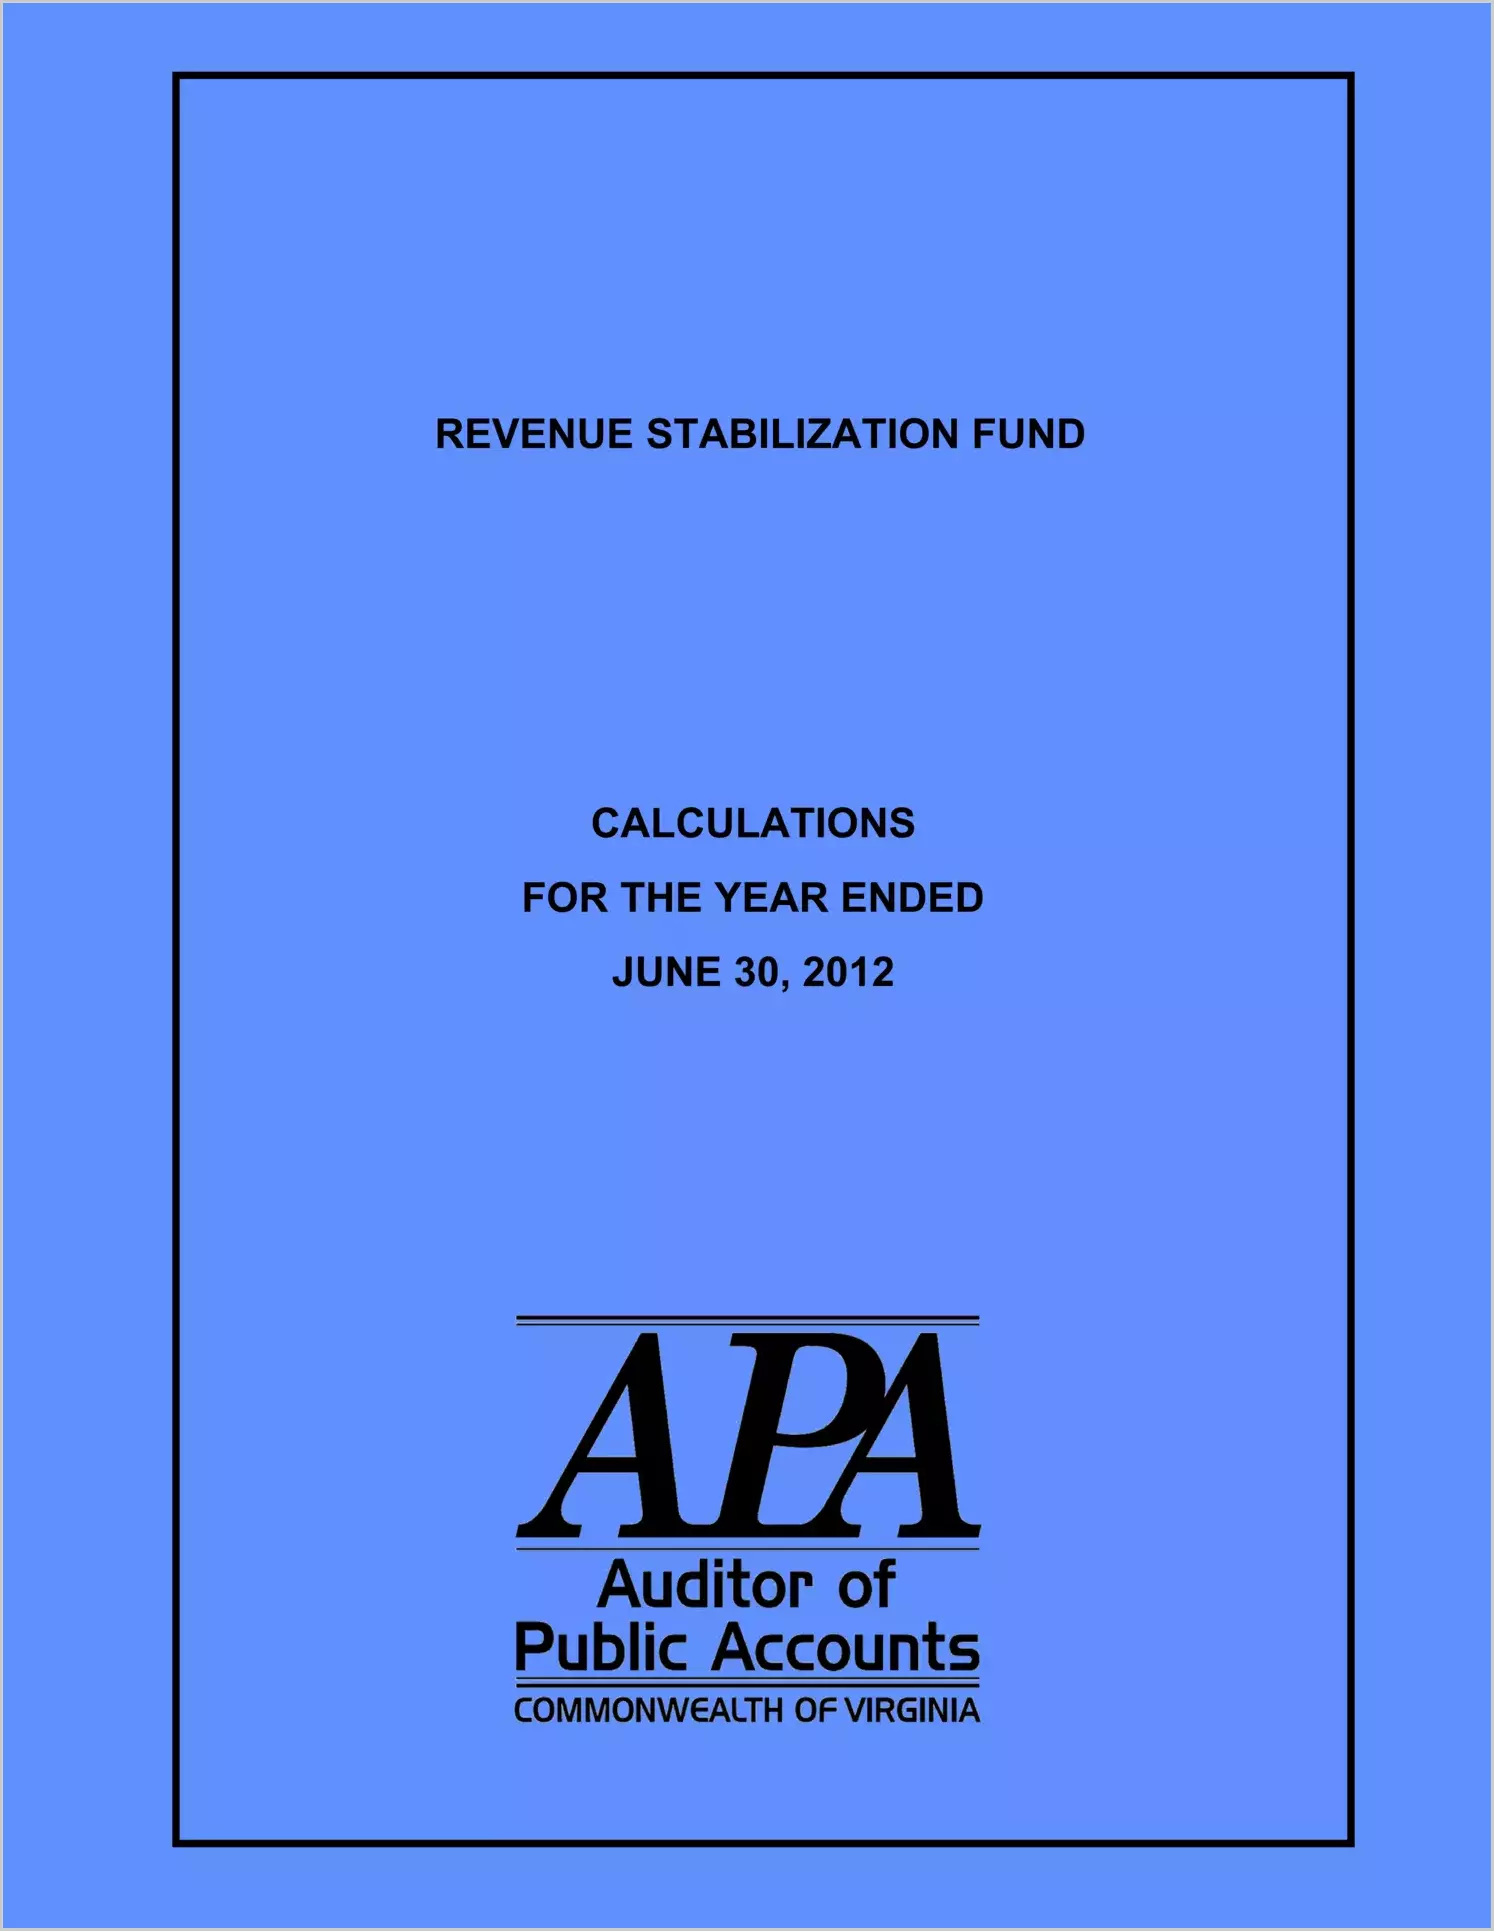 Revenue Stabilization Fund Calculations for the year ended June 30, 2012